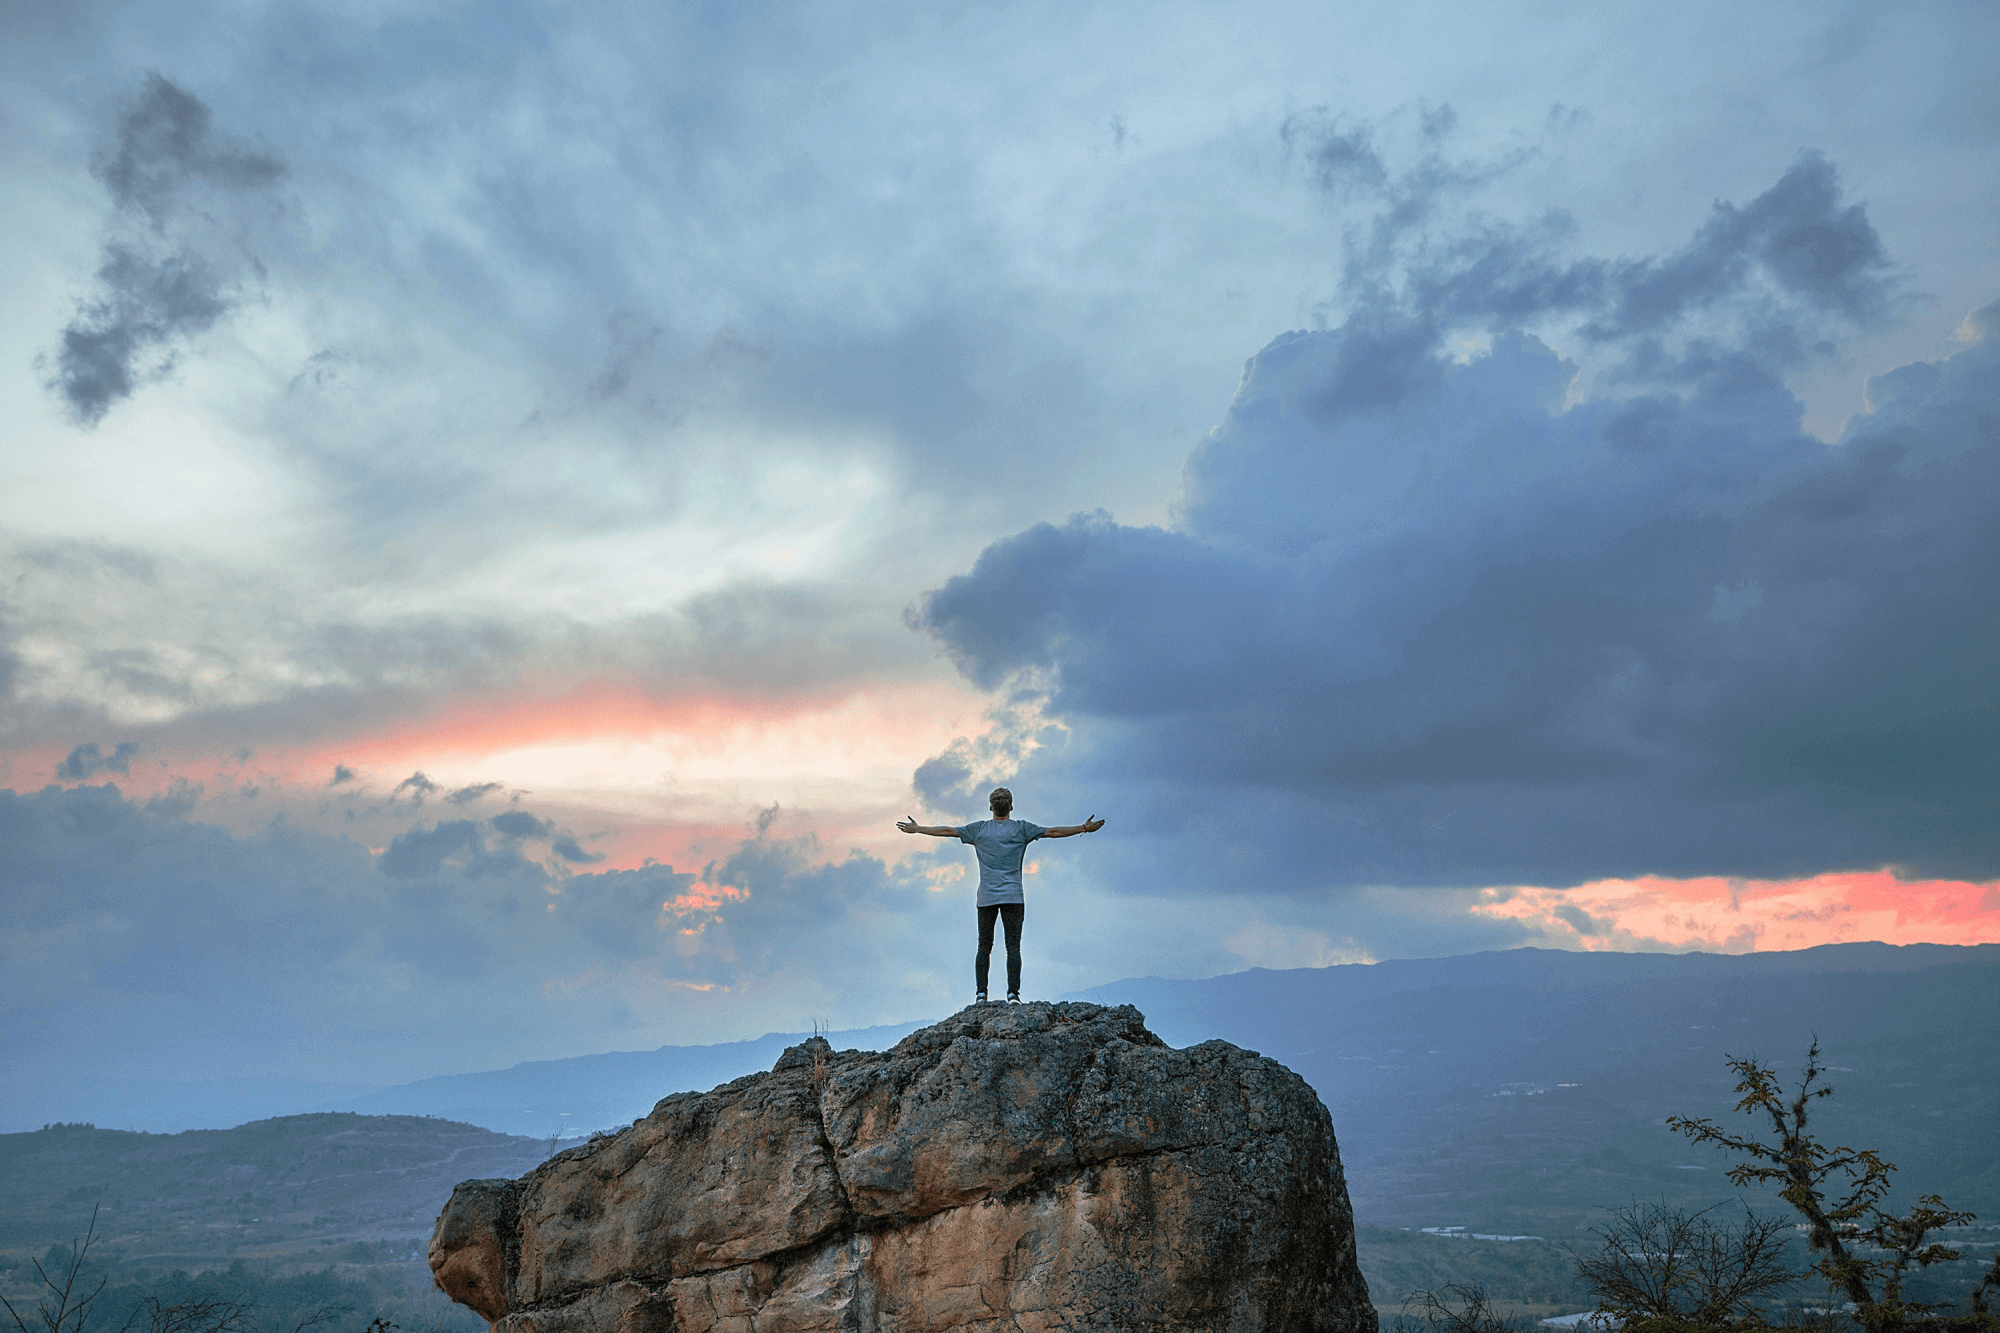 A man standing on top of a mountain